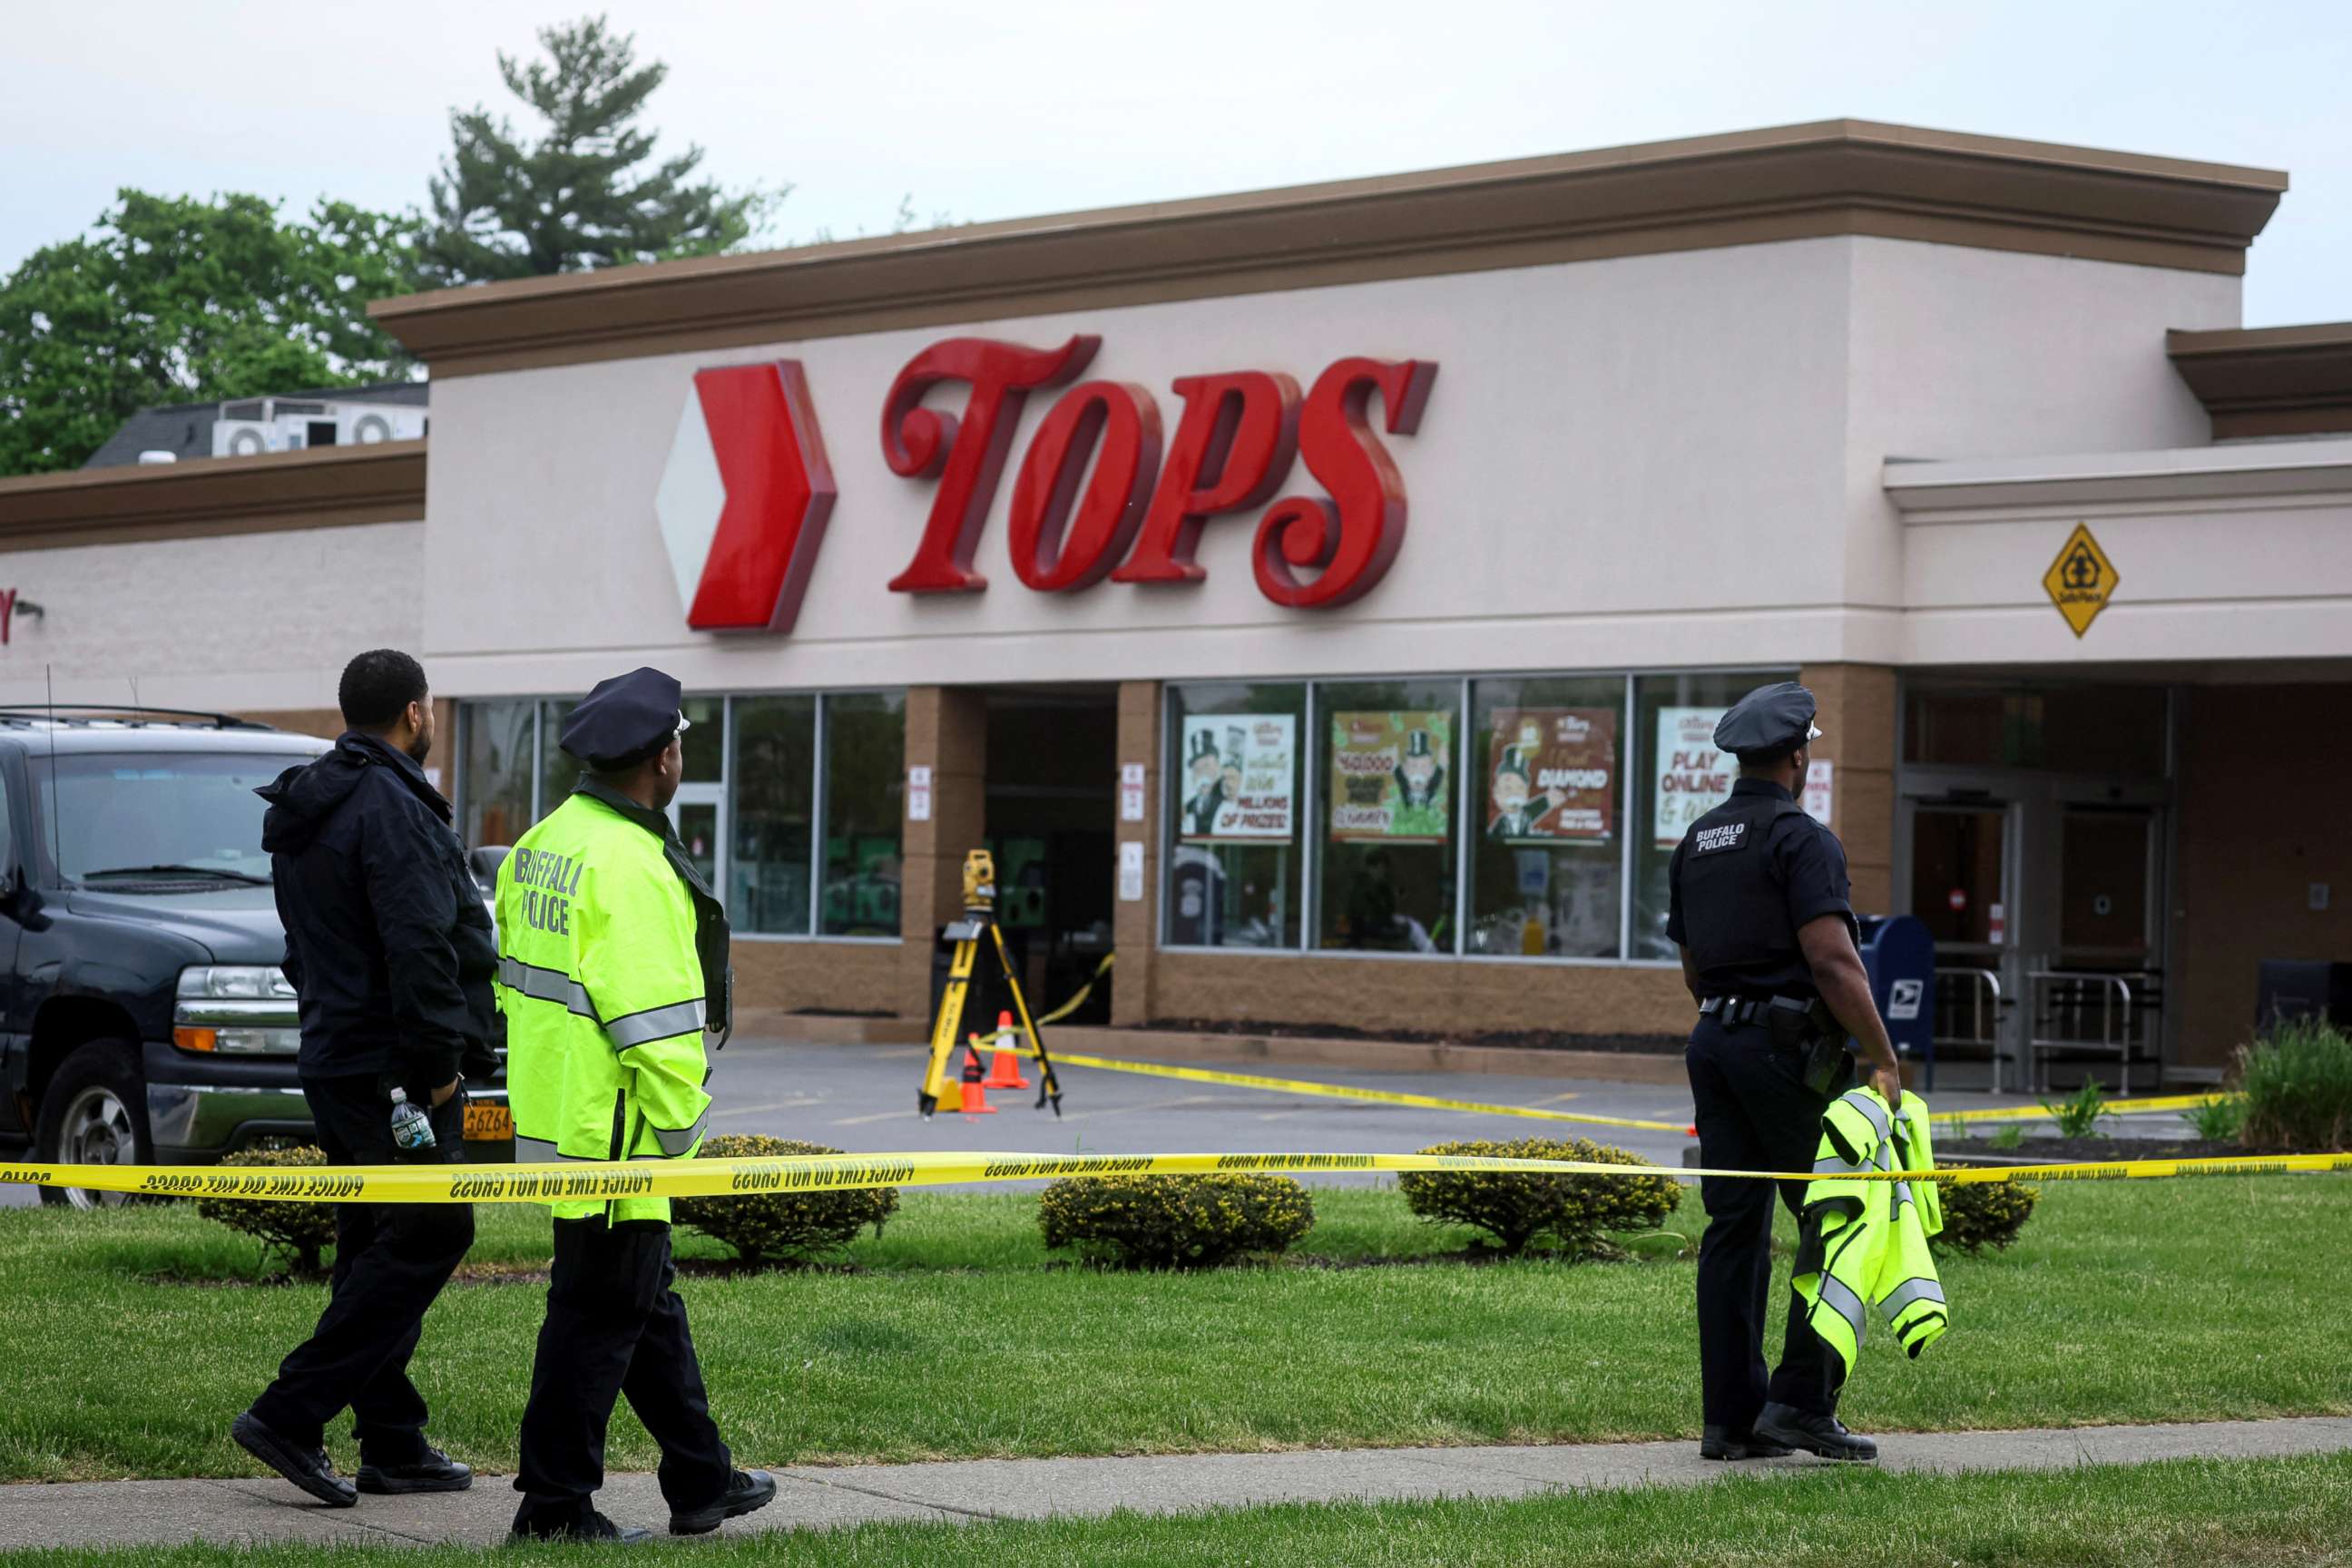 PHOTO: Members of the Buffalo Police department work at the scene of a shooting at a Tops supermarket in Buffalo, New York, May 16, 2022.